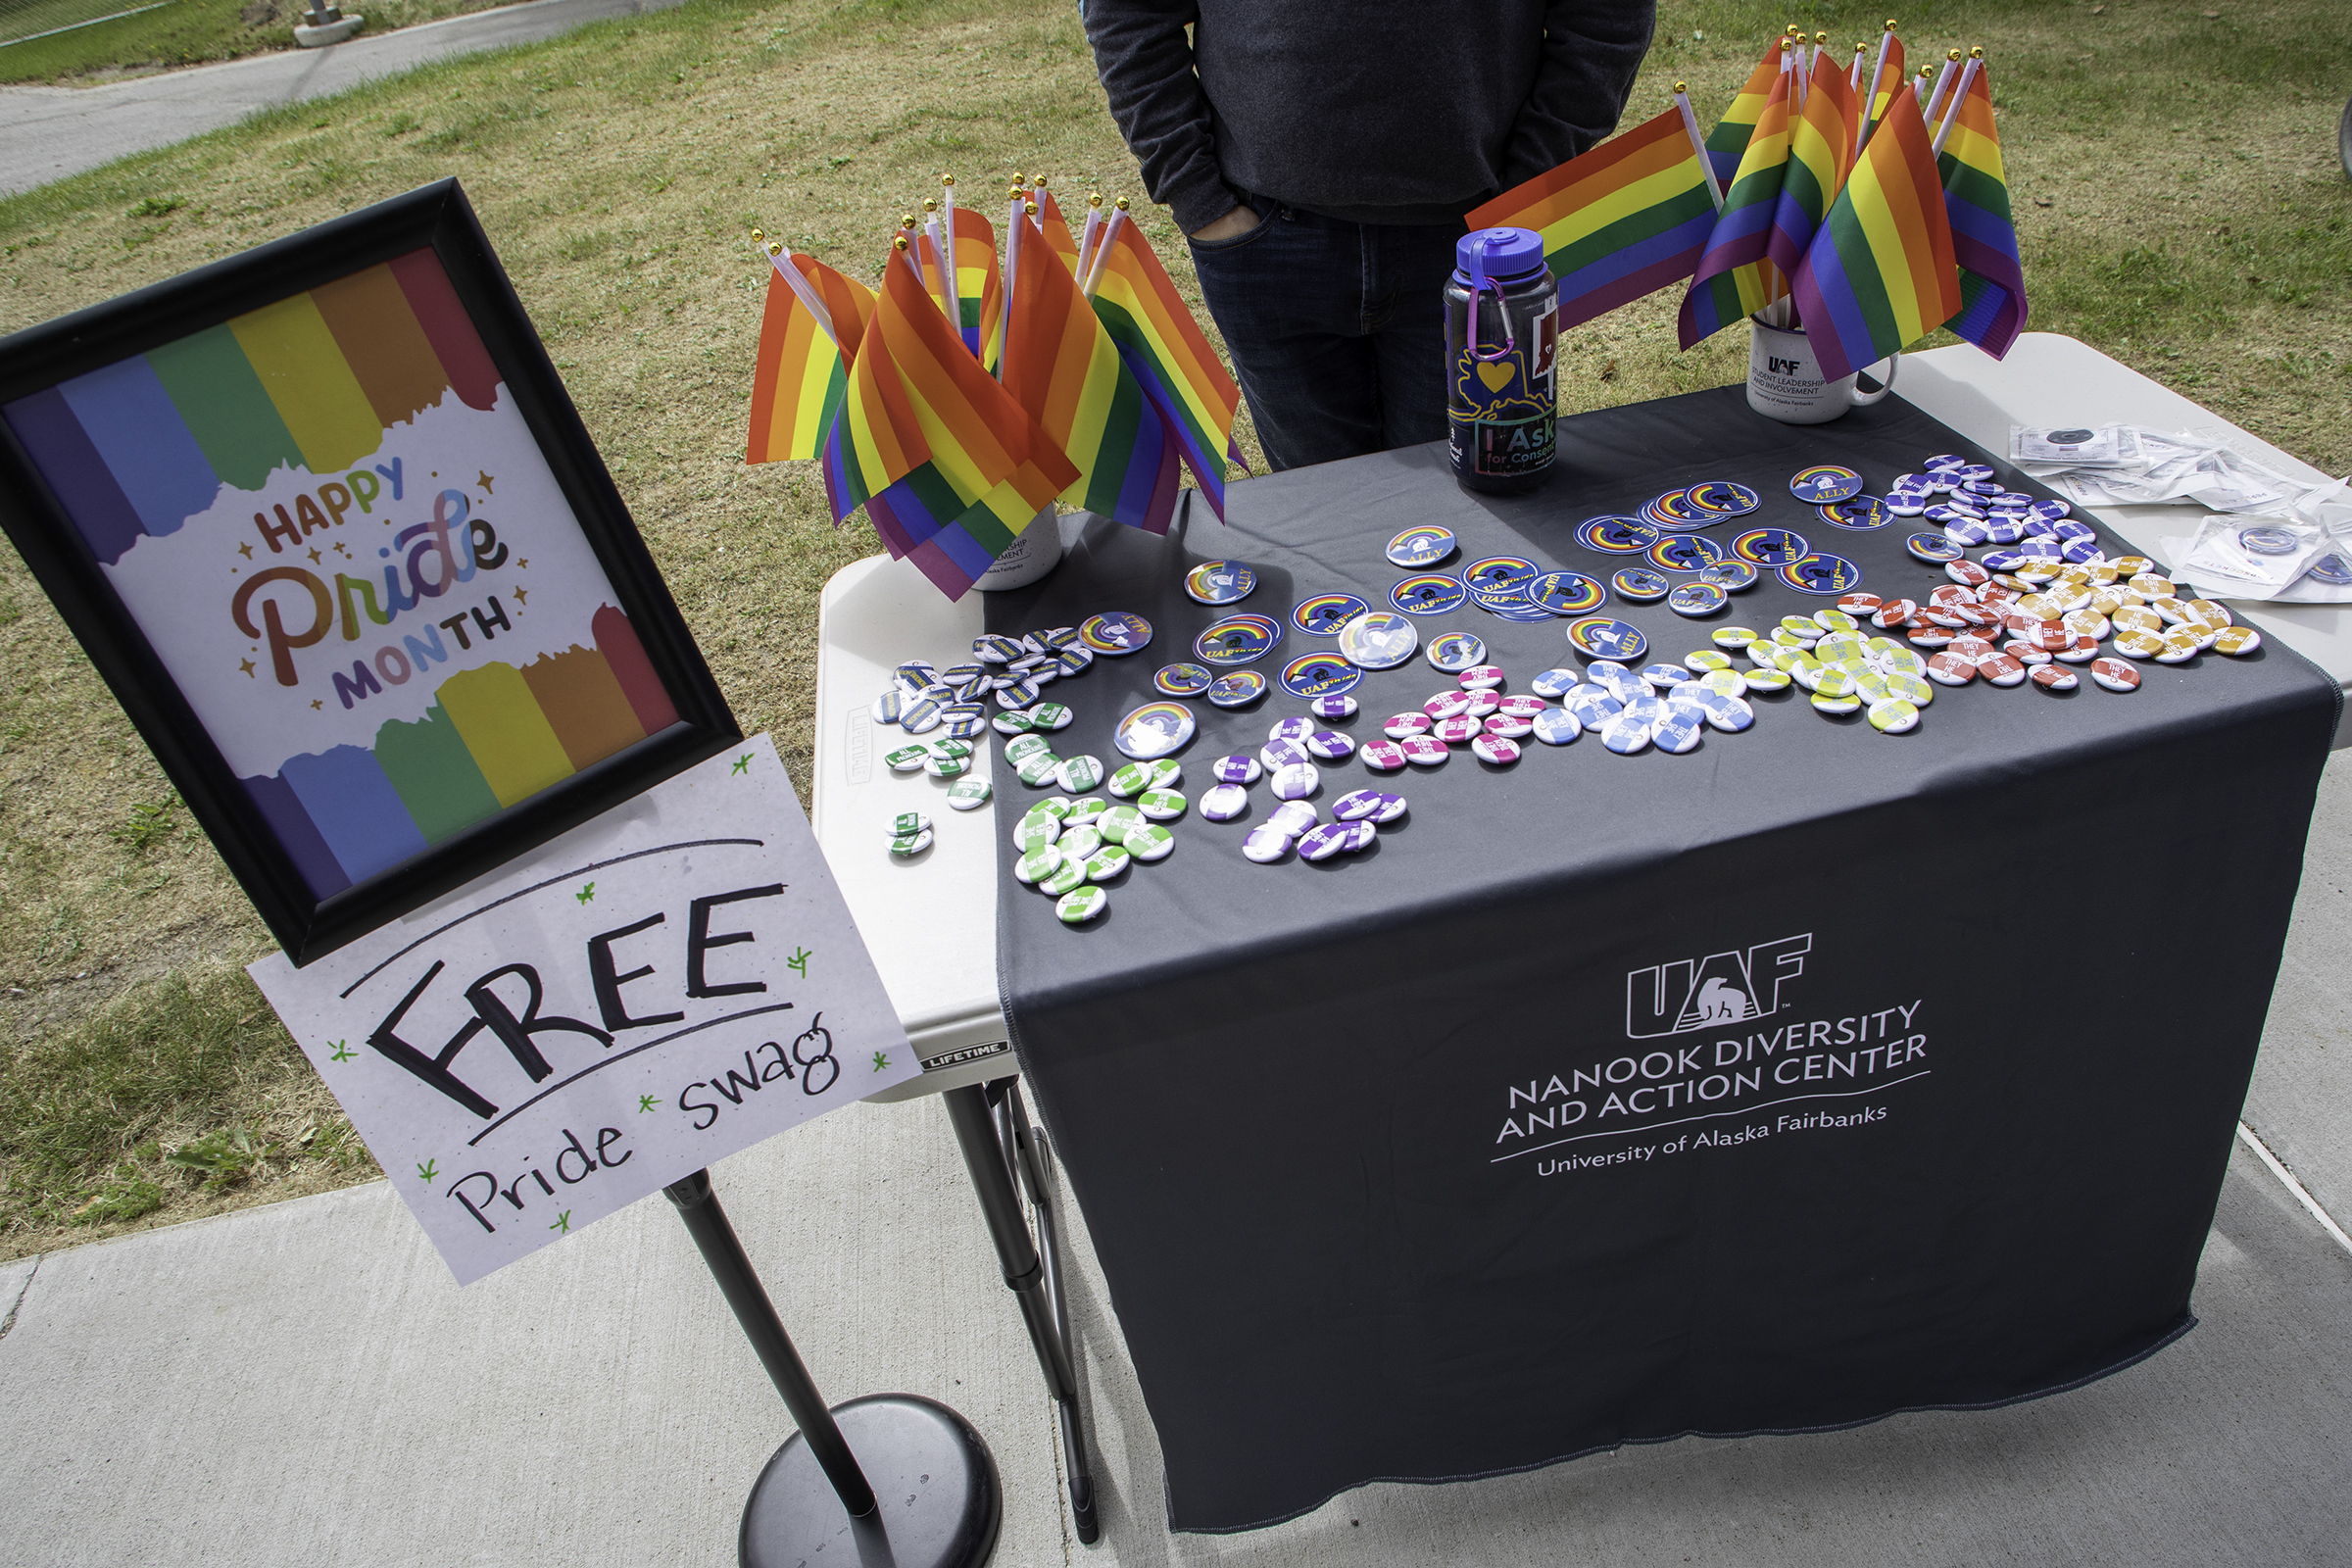 The UAF Nanook Diversity and Action Center gave out free Pride swag during Ice Cream Thursday outside the Wood Center on the UAF campus Thursday, June 9, 2022.